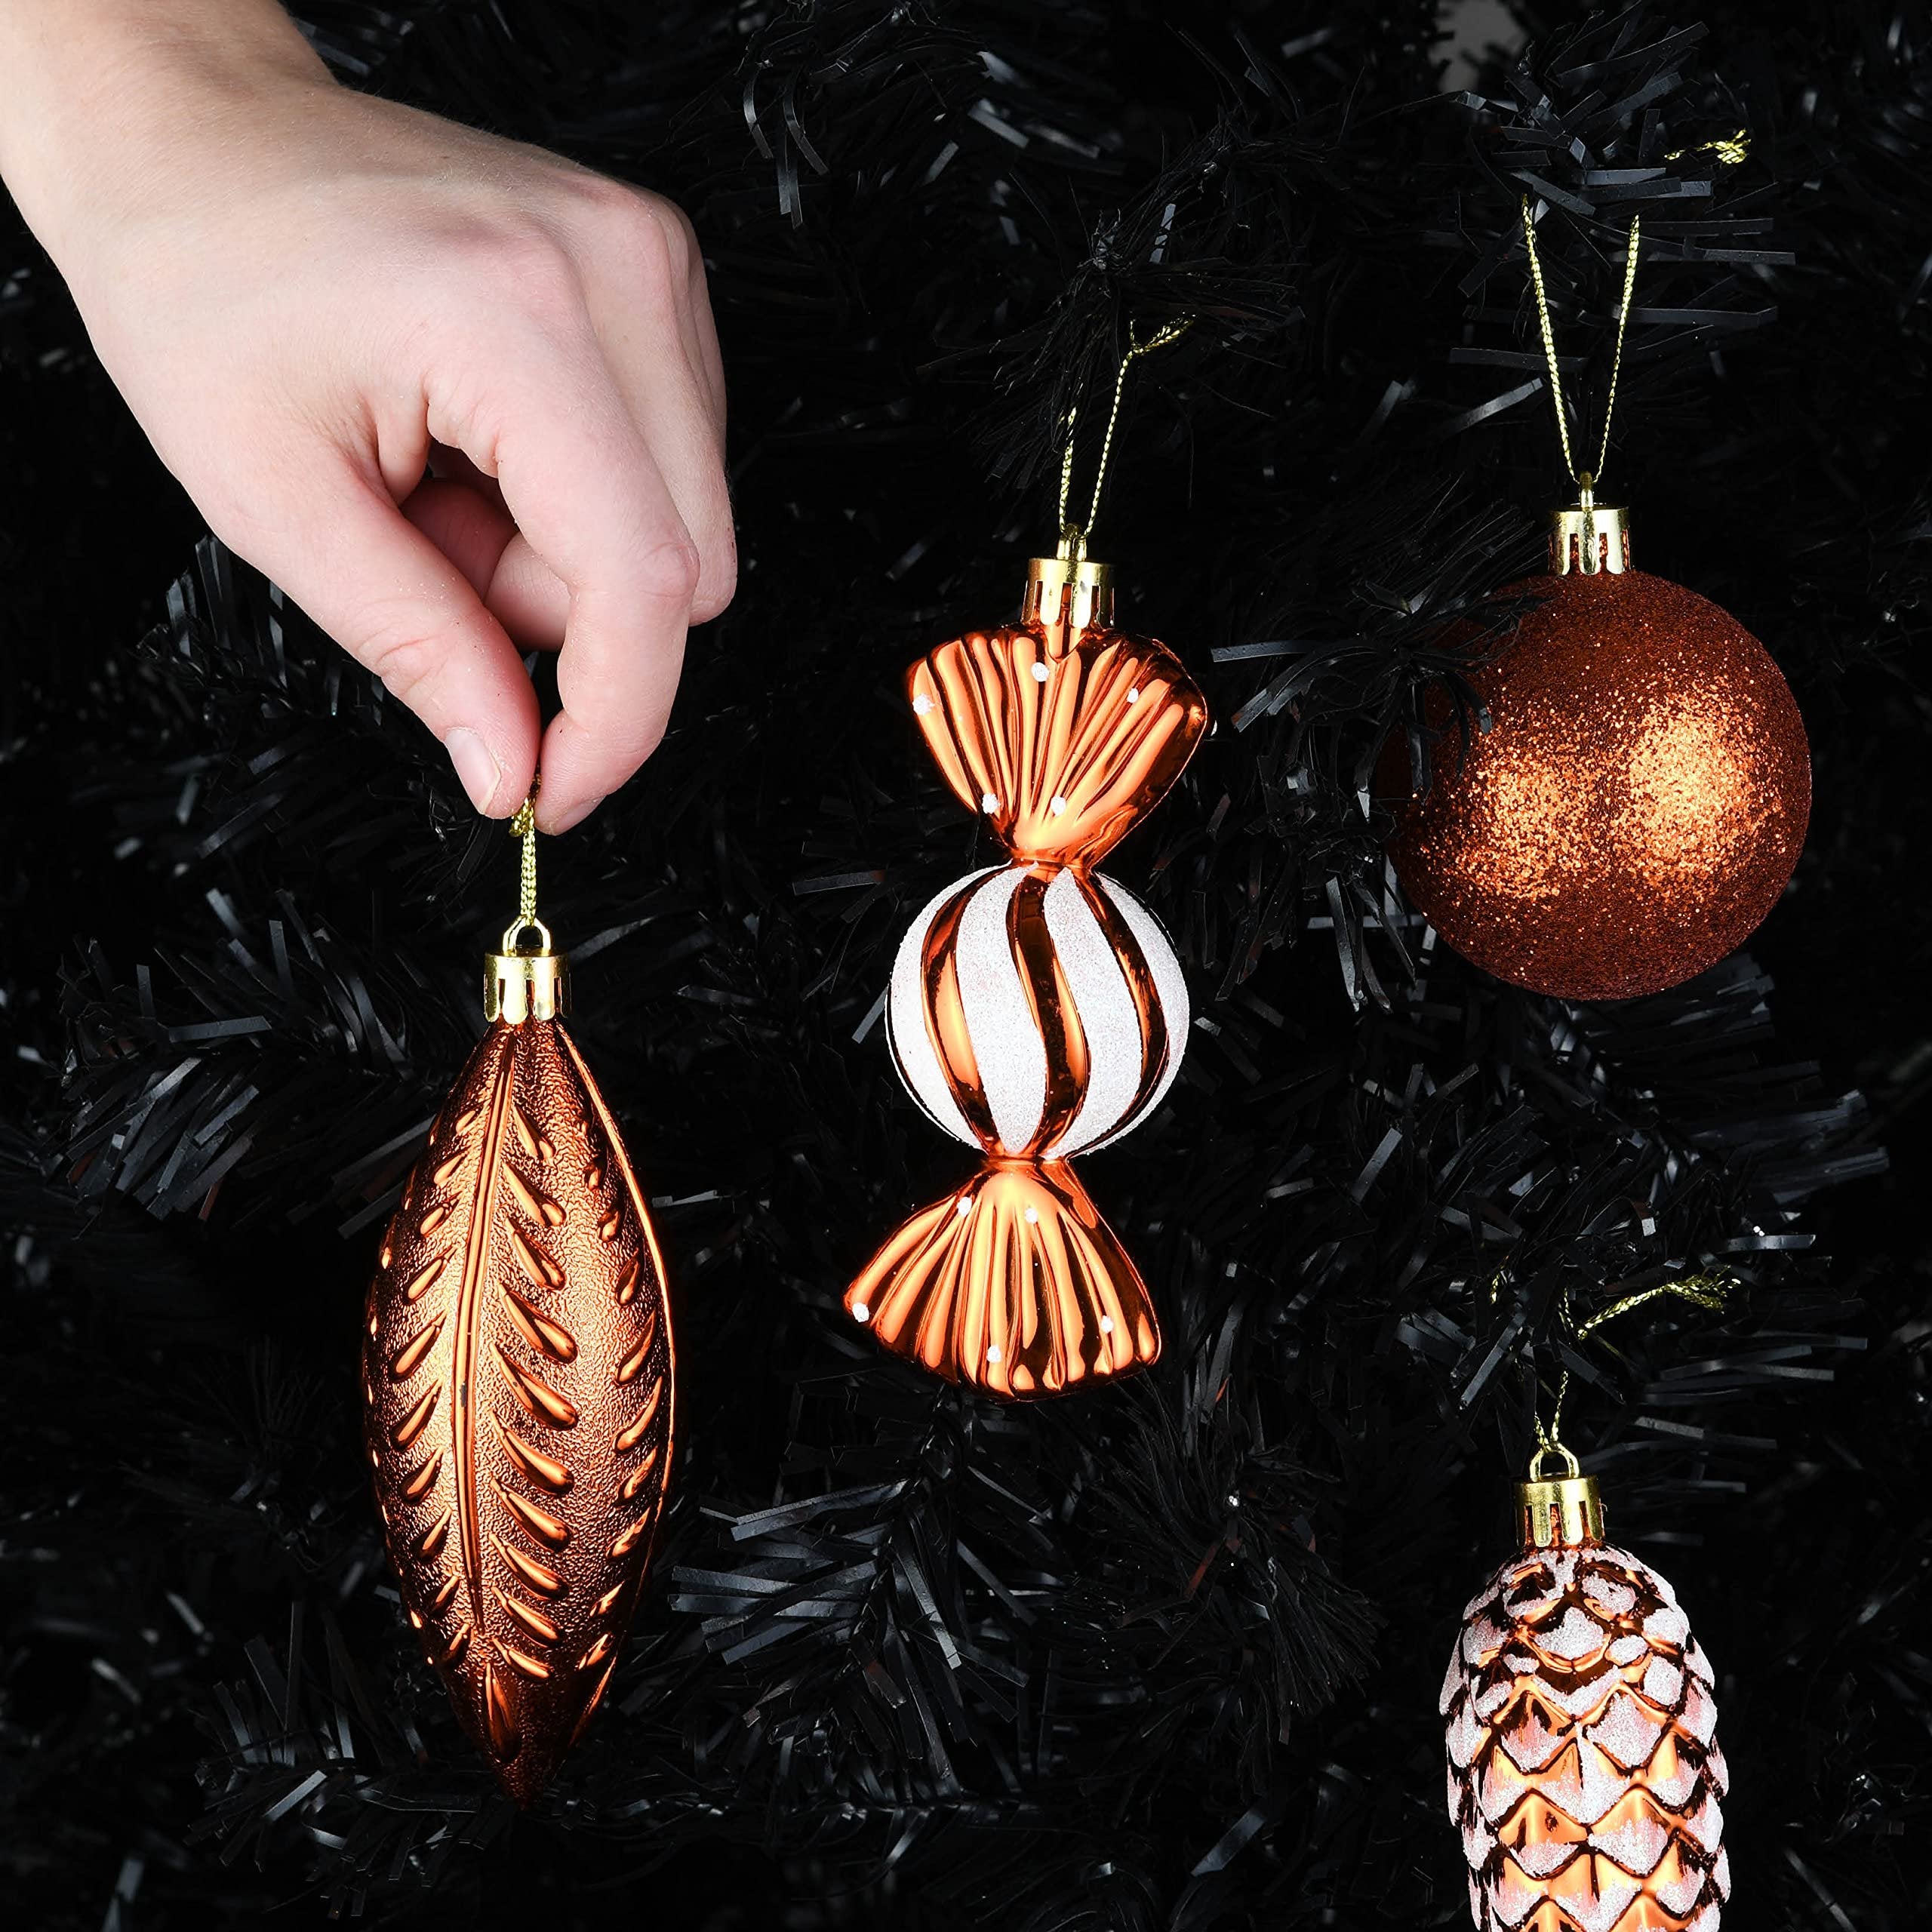 Prextex Christmas Ball Ornaments for Christmas Decorations (Copper) | 24 pcs Xmas Tree Shatterproof Ornaments with Hanging Loop for Holiday, Wreath and Party Decorations